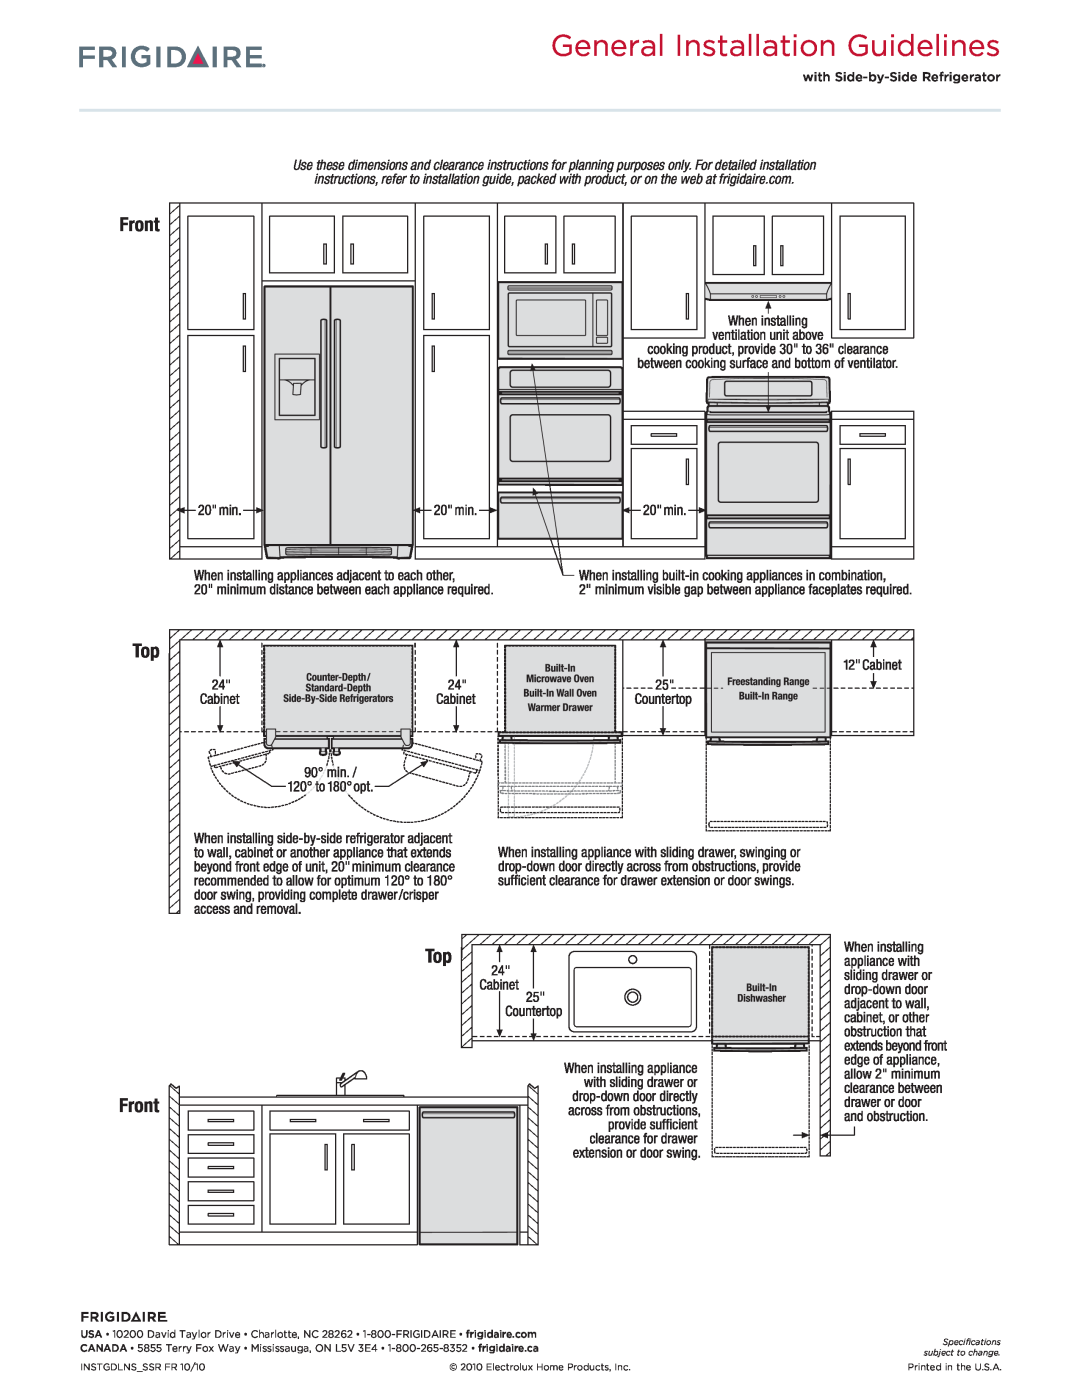 Frigidaire MWV150K W/B dimensions General Installation Guidelines, Top Front 